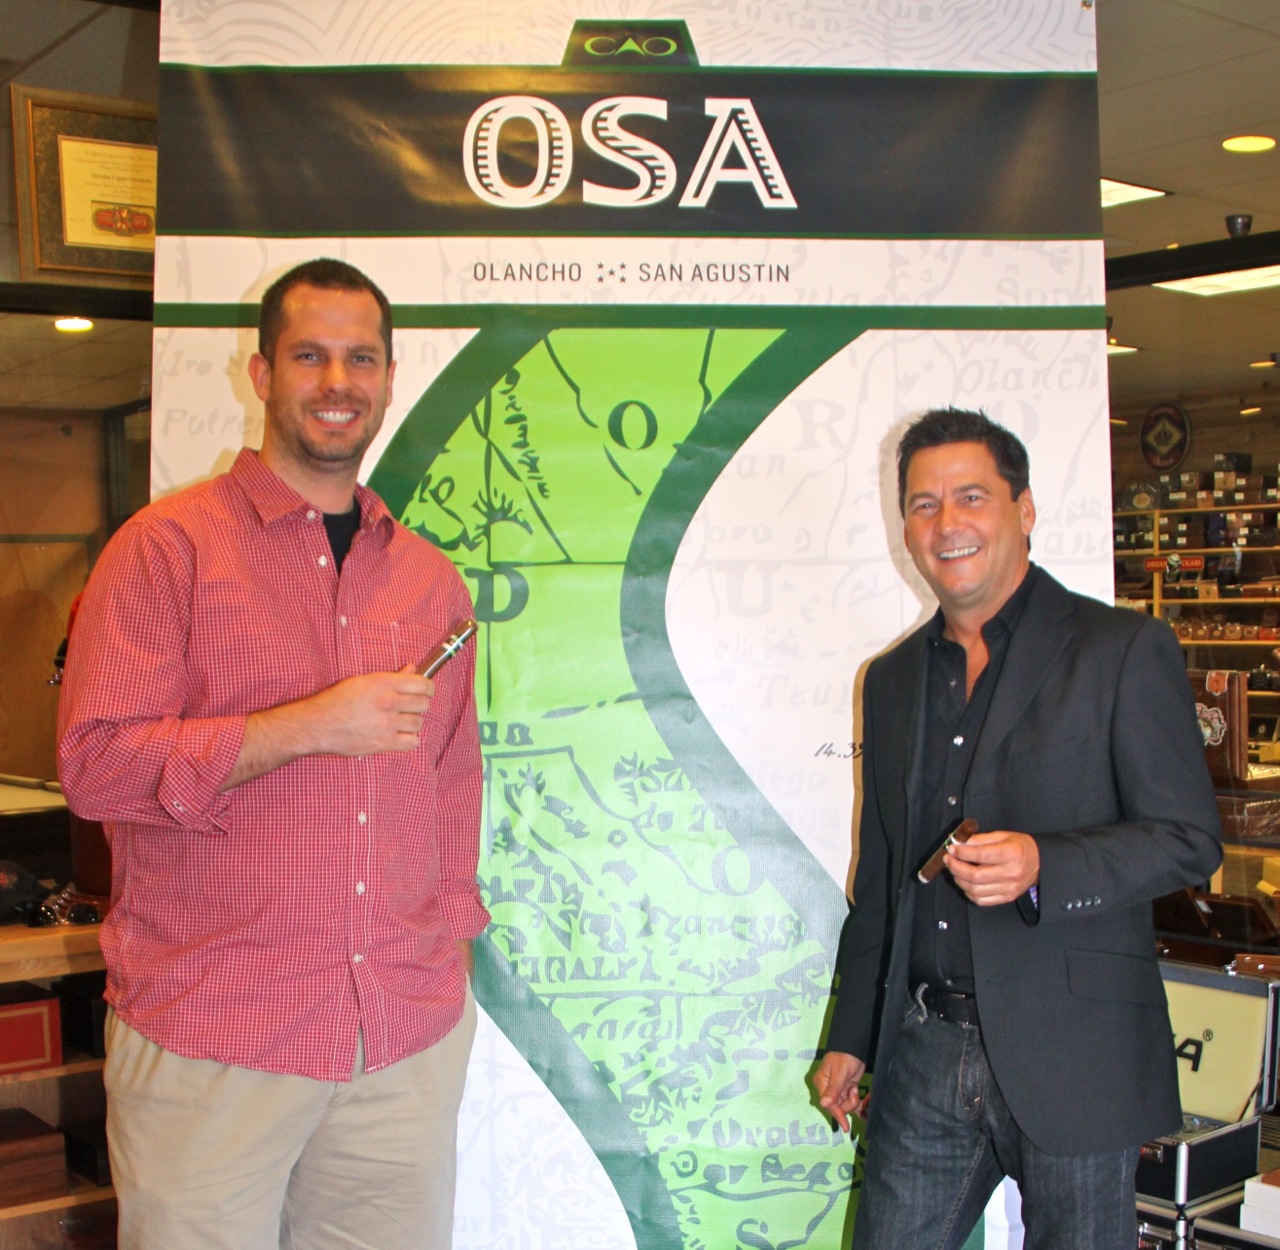 CAO OSA Sol Tour featuring Rick Rodriguez (plus giveaway)